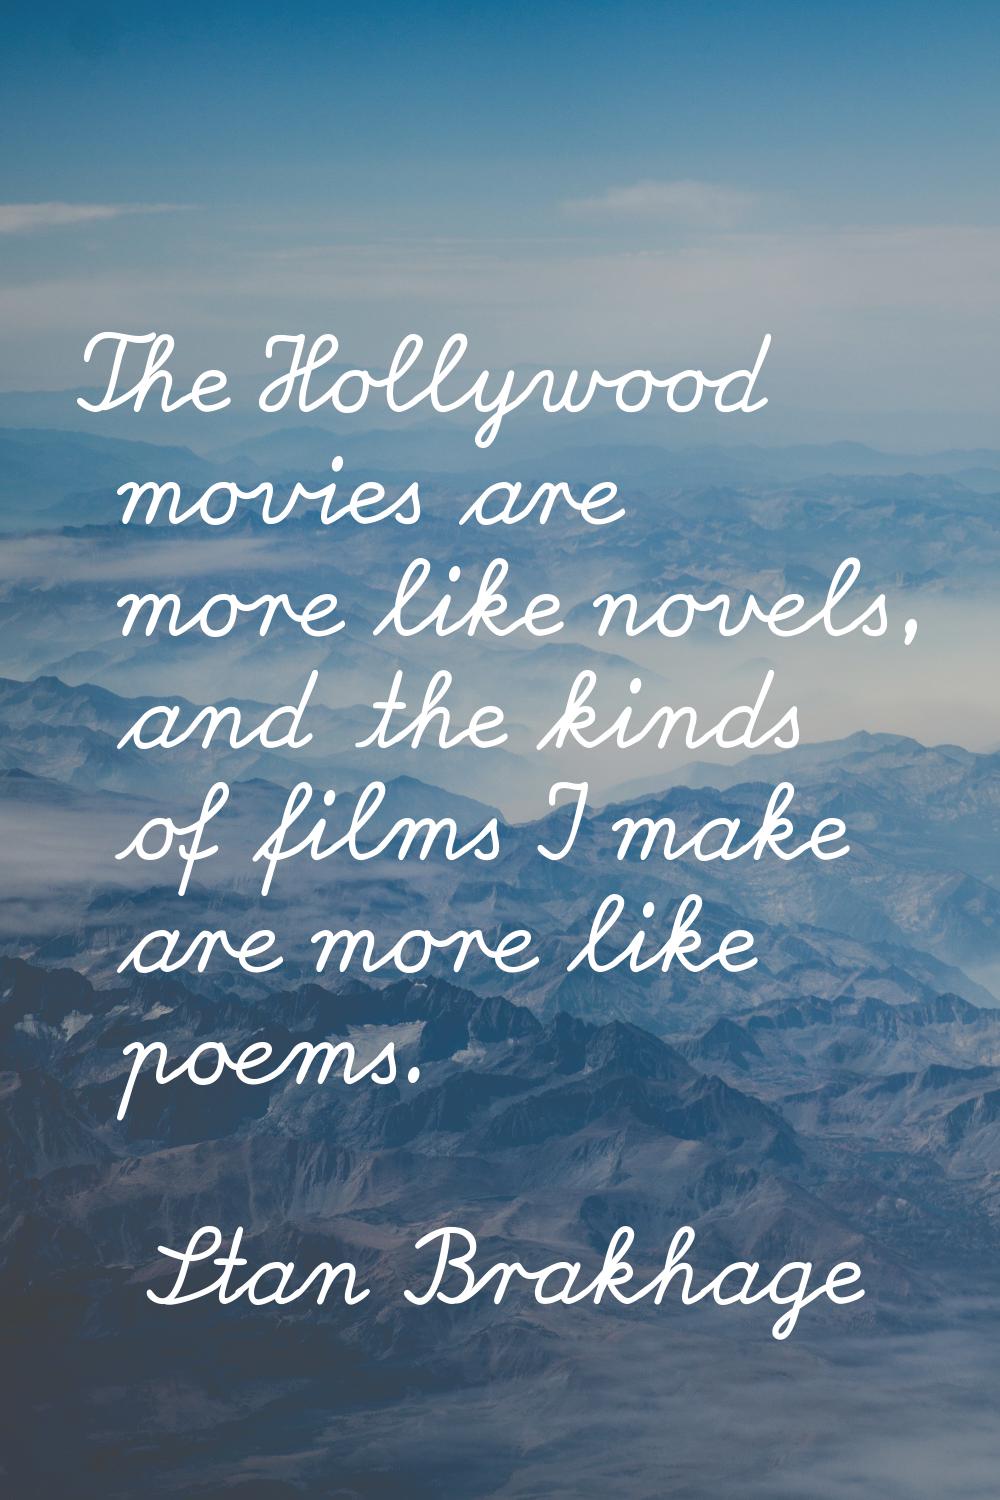 The Hollywood movies are more like novels, and the kinds of films I make are more like poems.